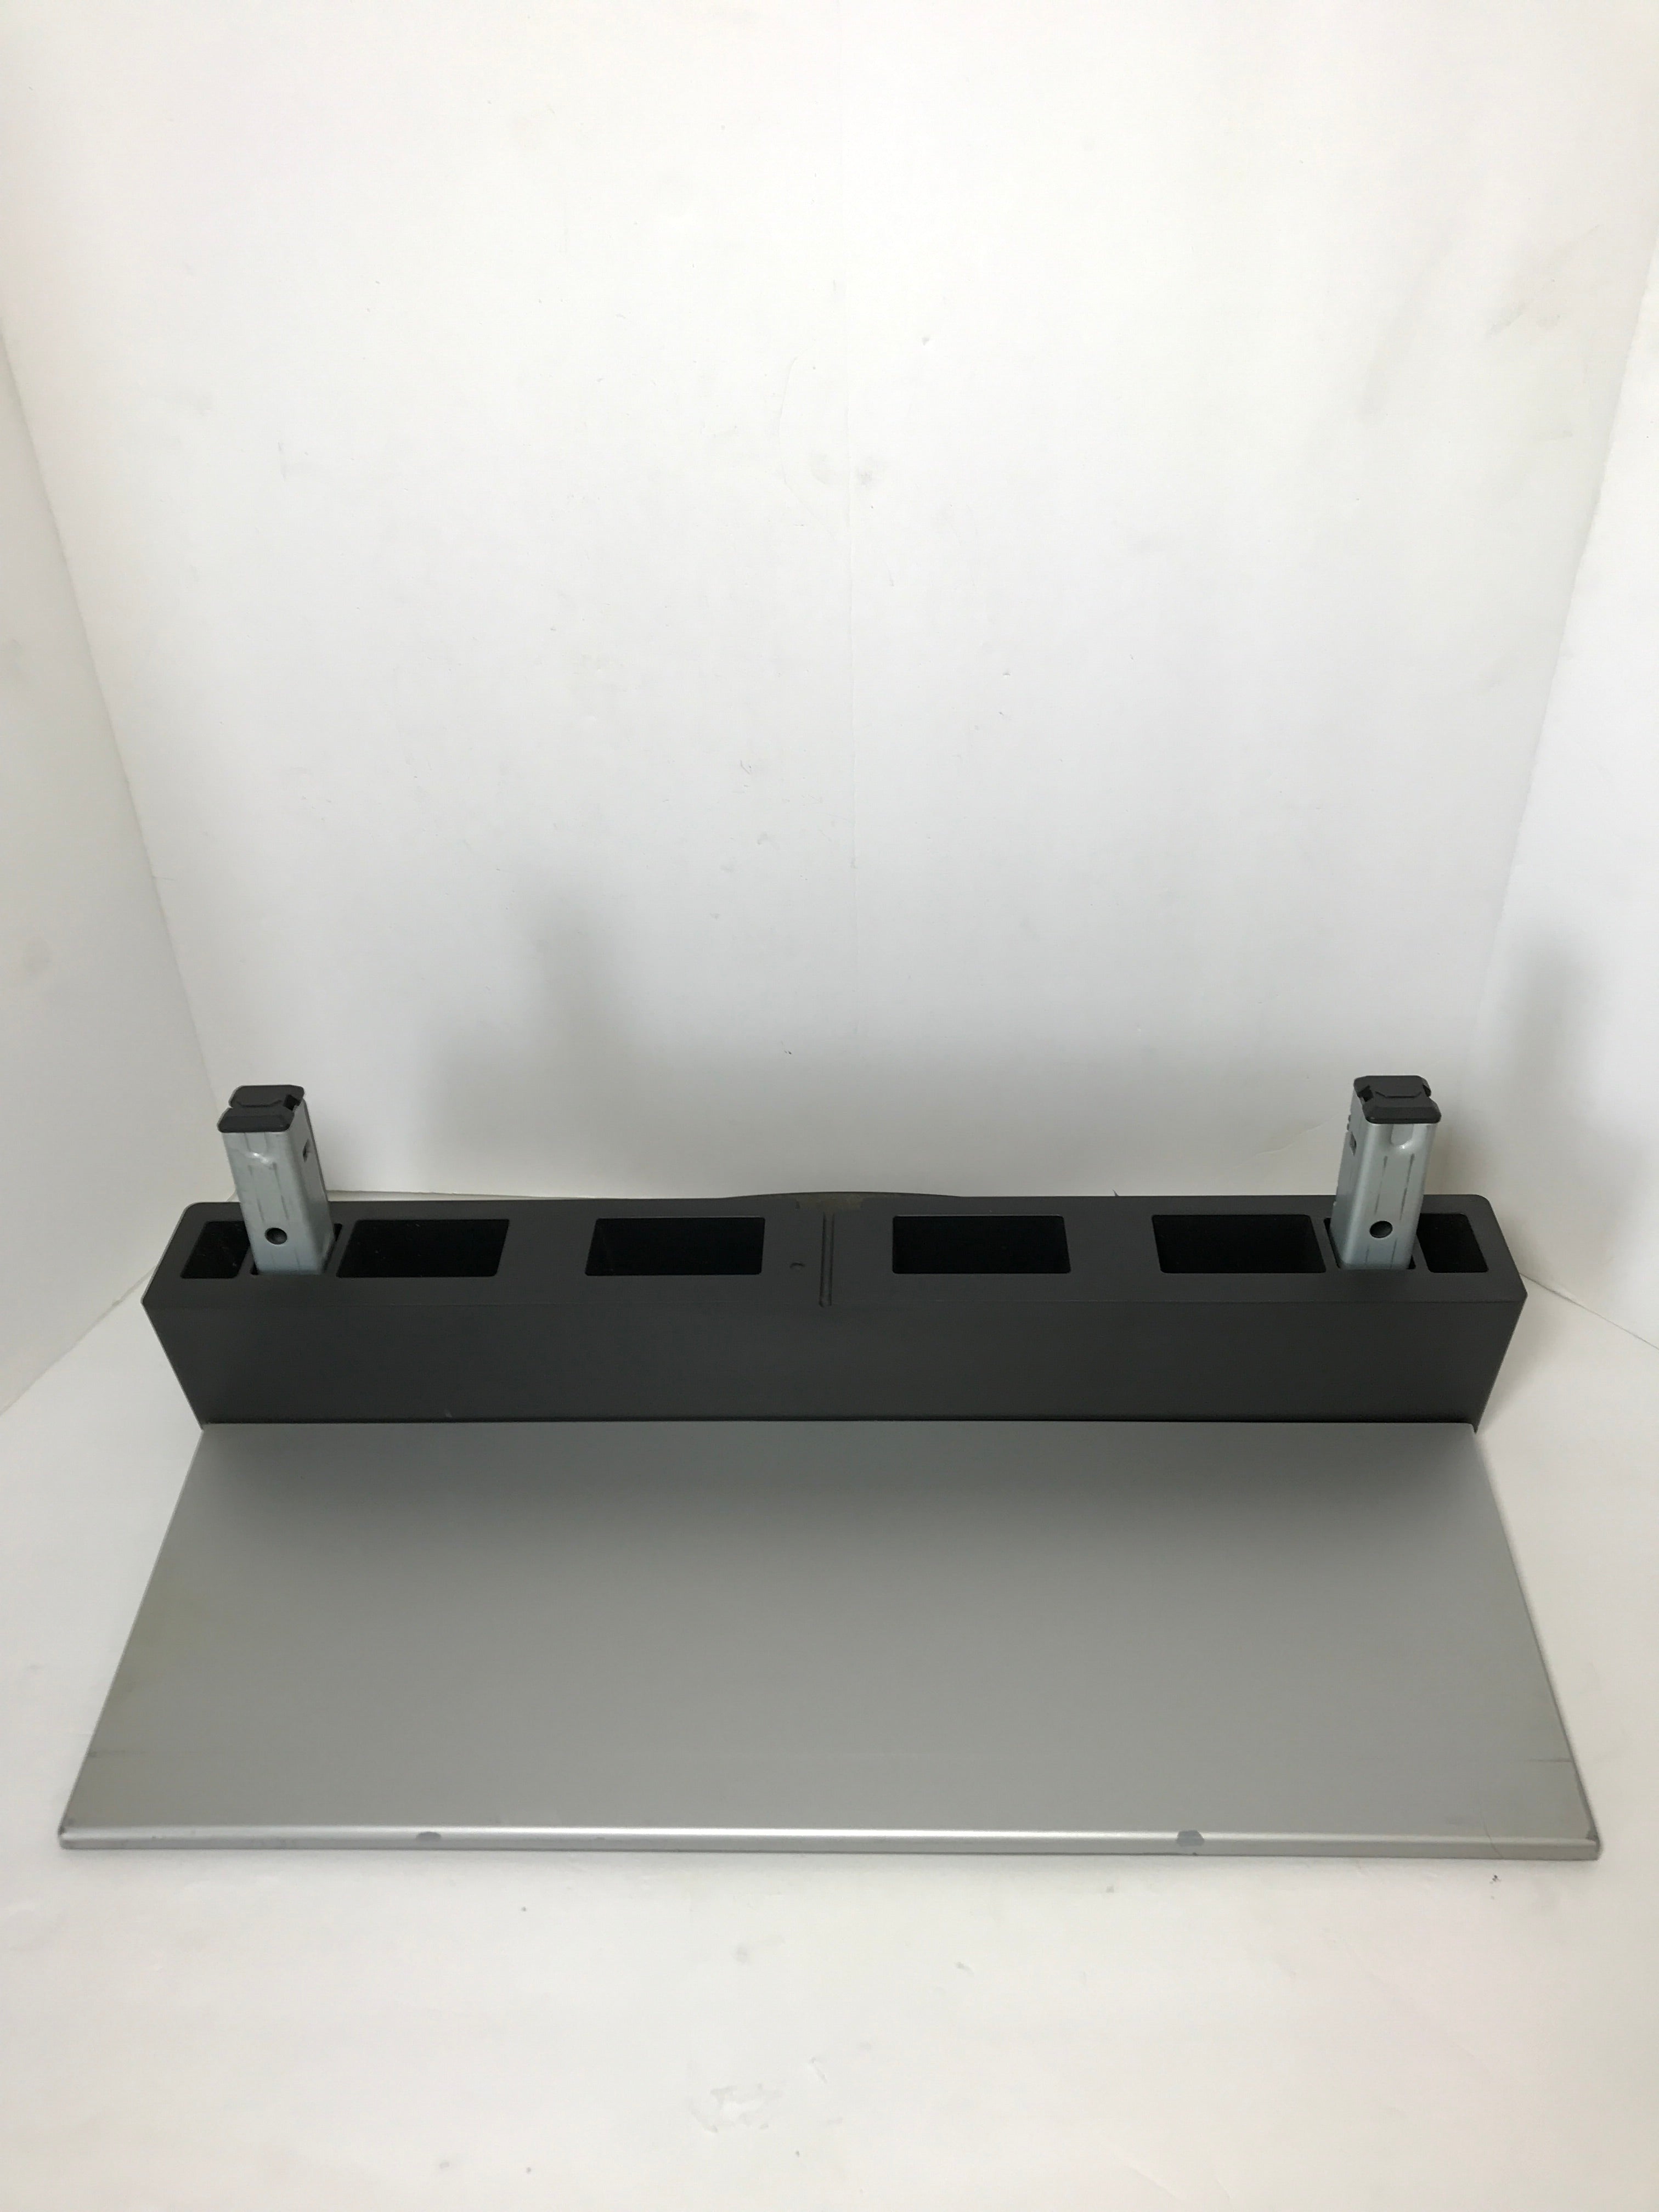 Sony KDL-40XBR2 TV Stand/Base